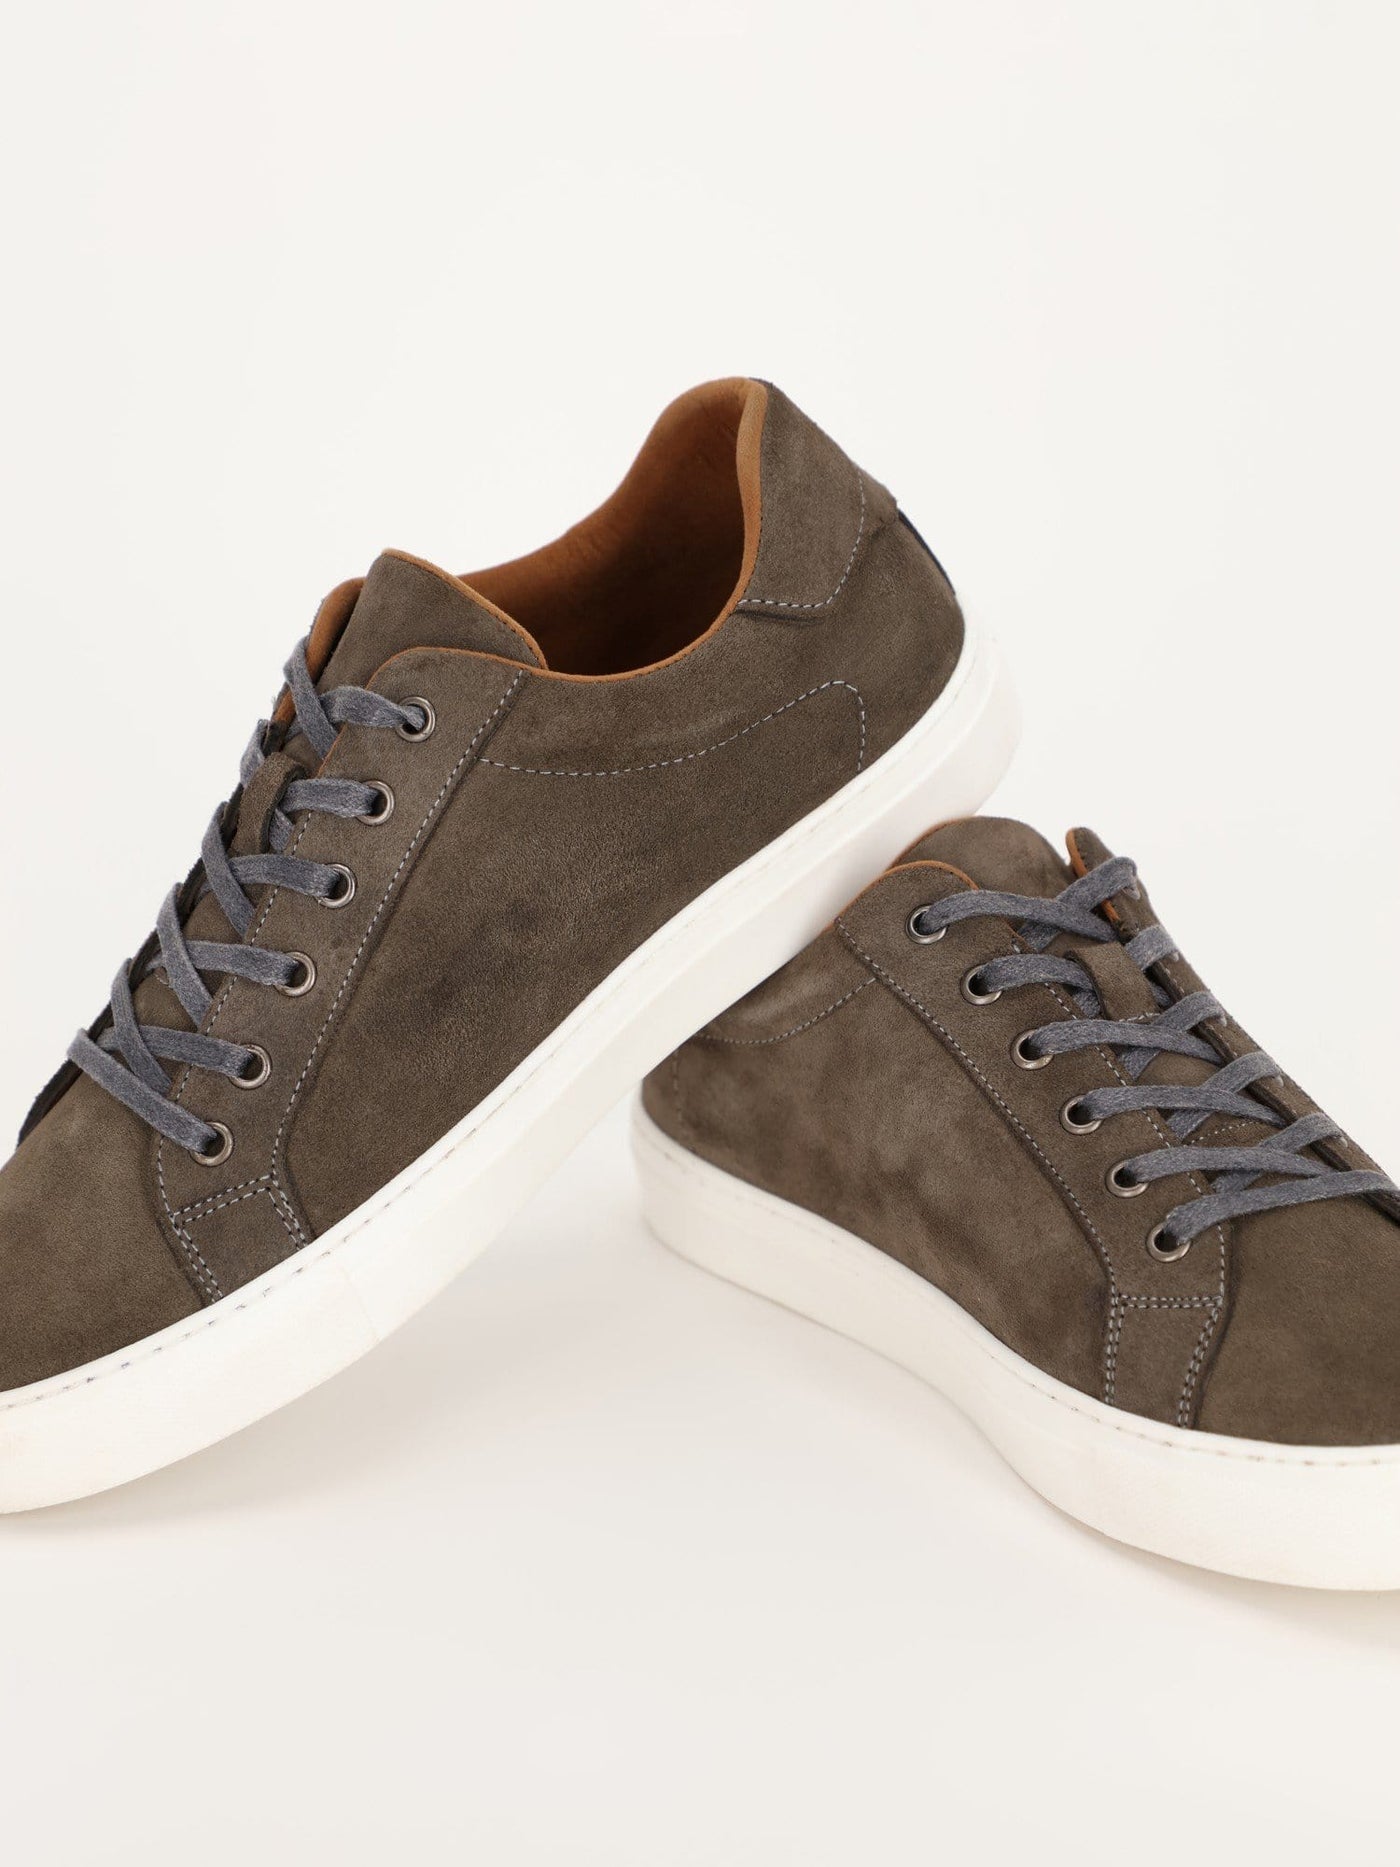 OR Sneakers D. ARMY / 41 Suede Leather Sneakers